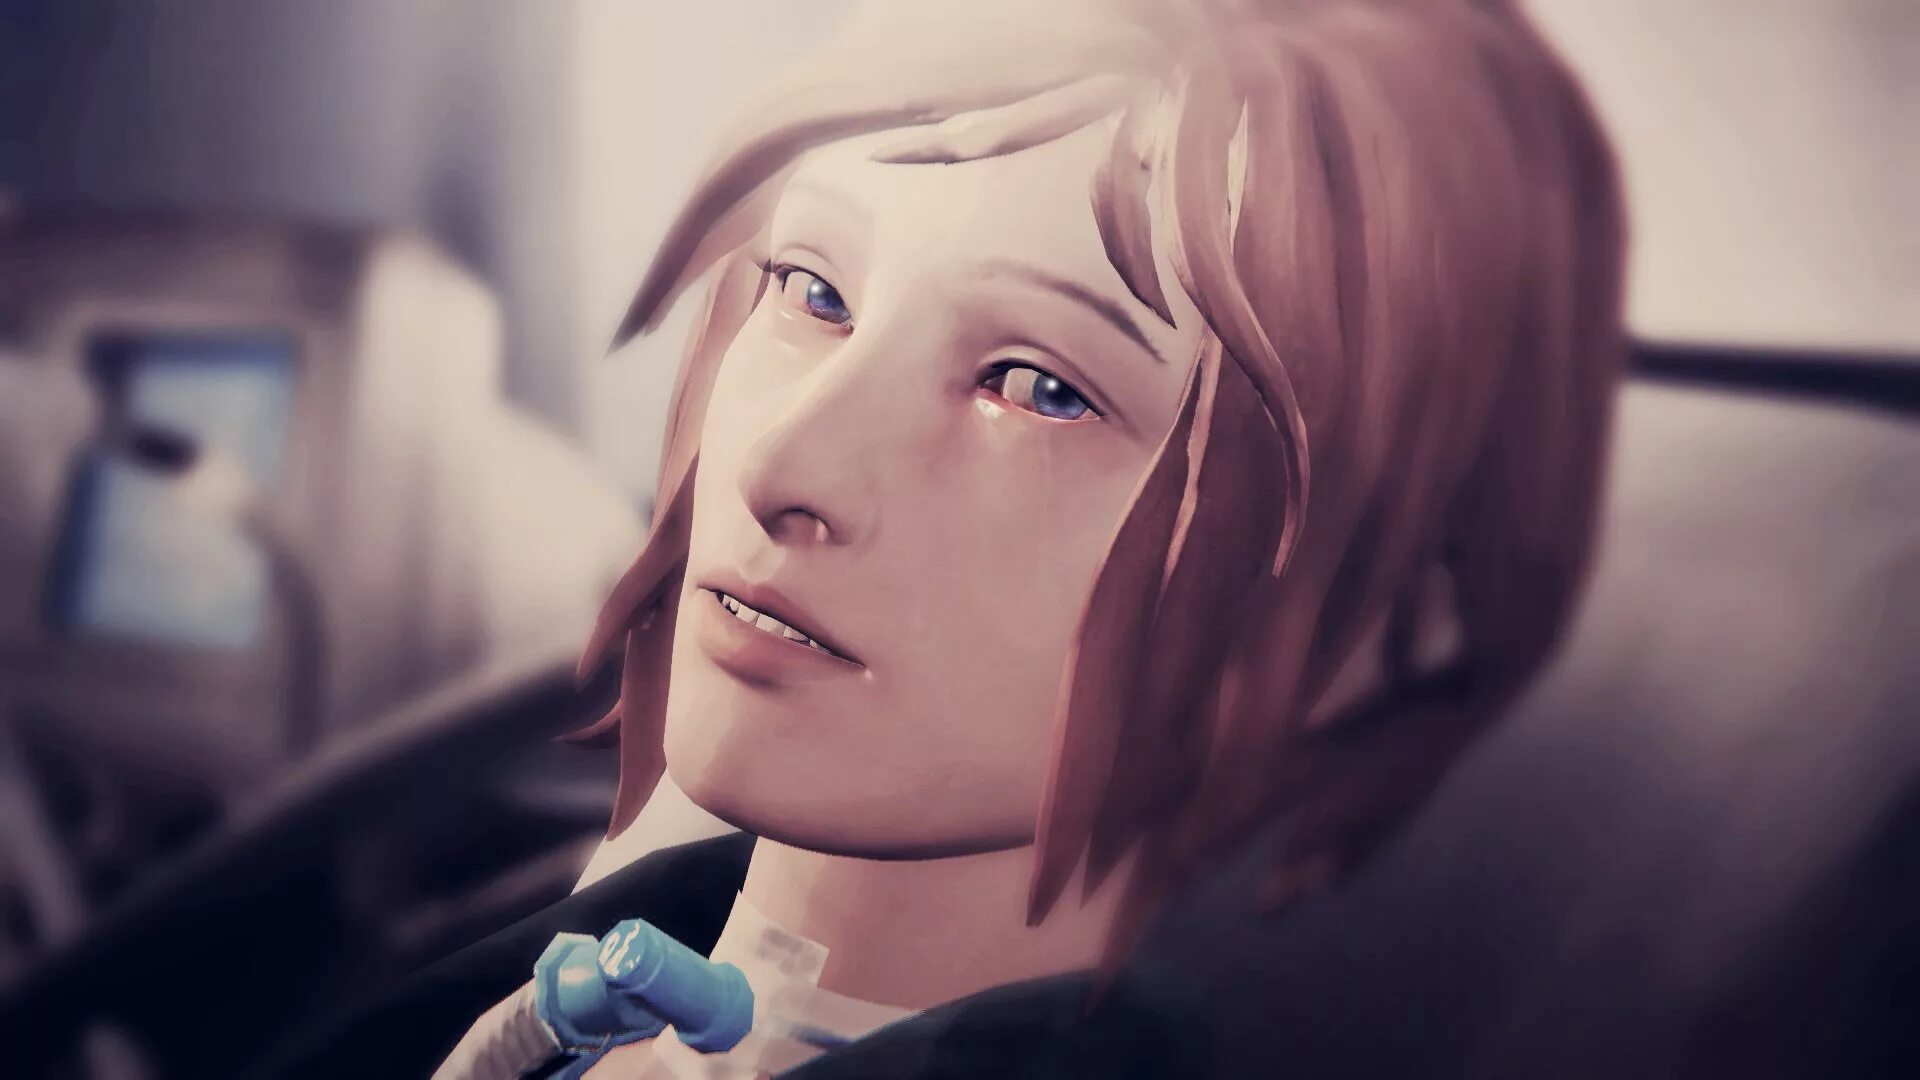 Life is searching. Life is Strange 1. Life is Strange Remastered.